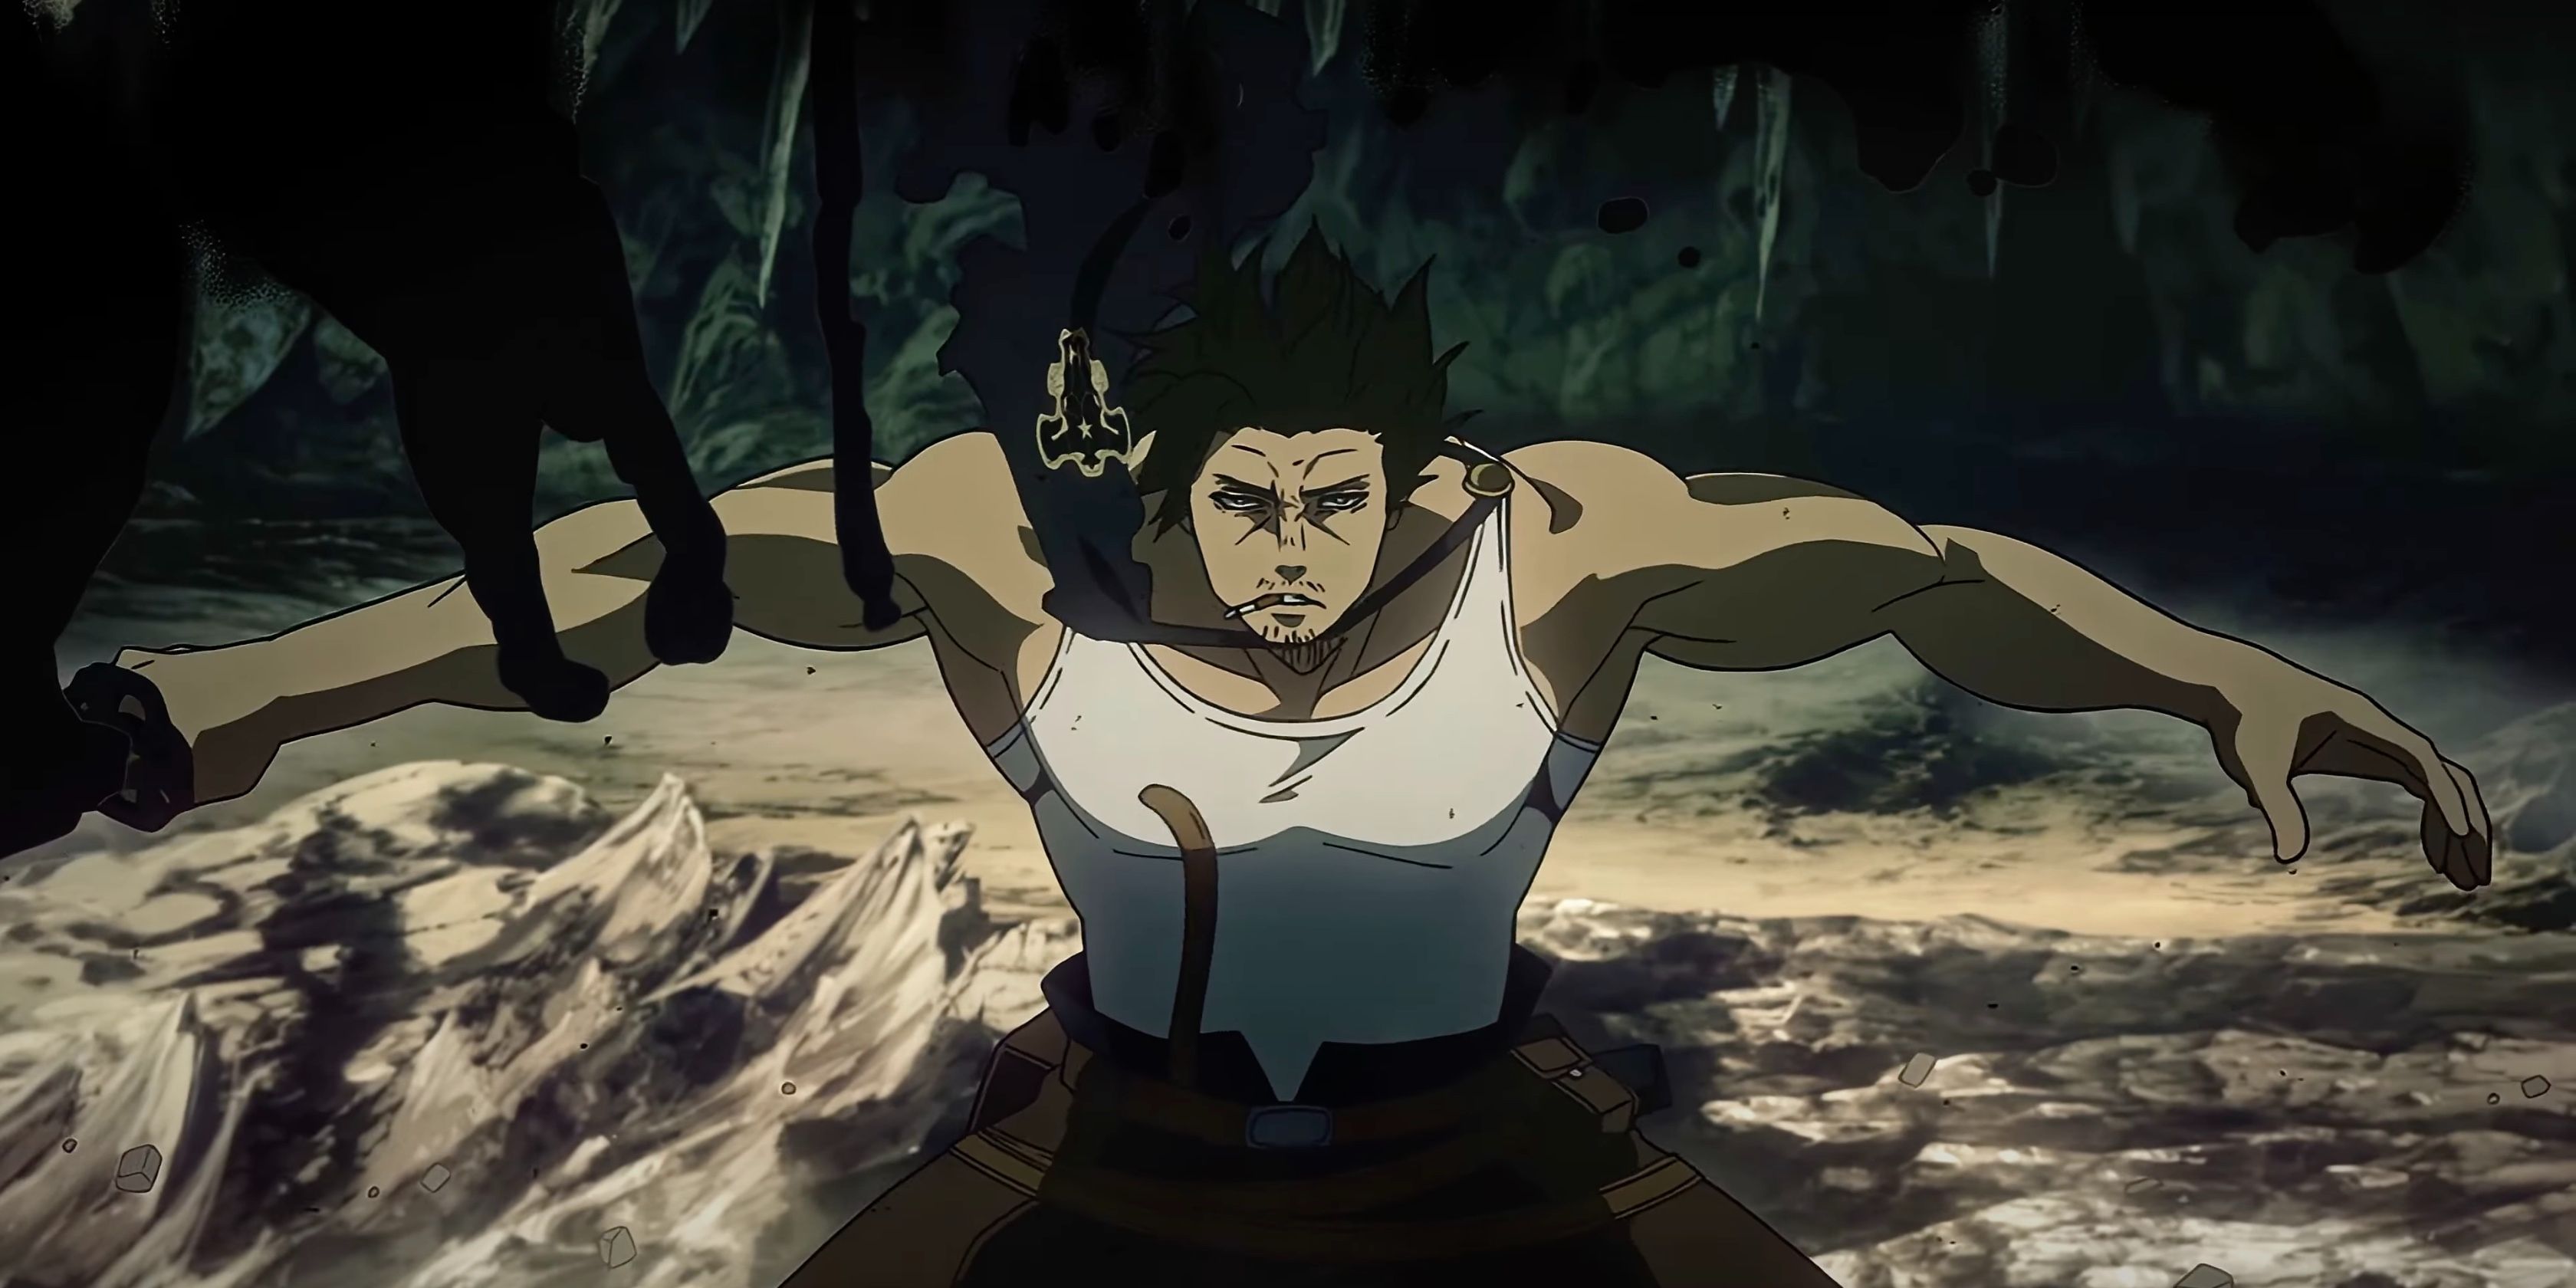 Yami unleashing his full power as darkness engulfs his right arm